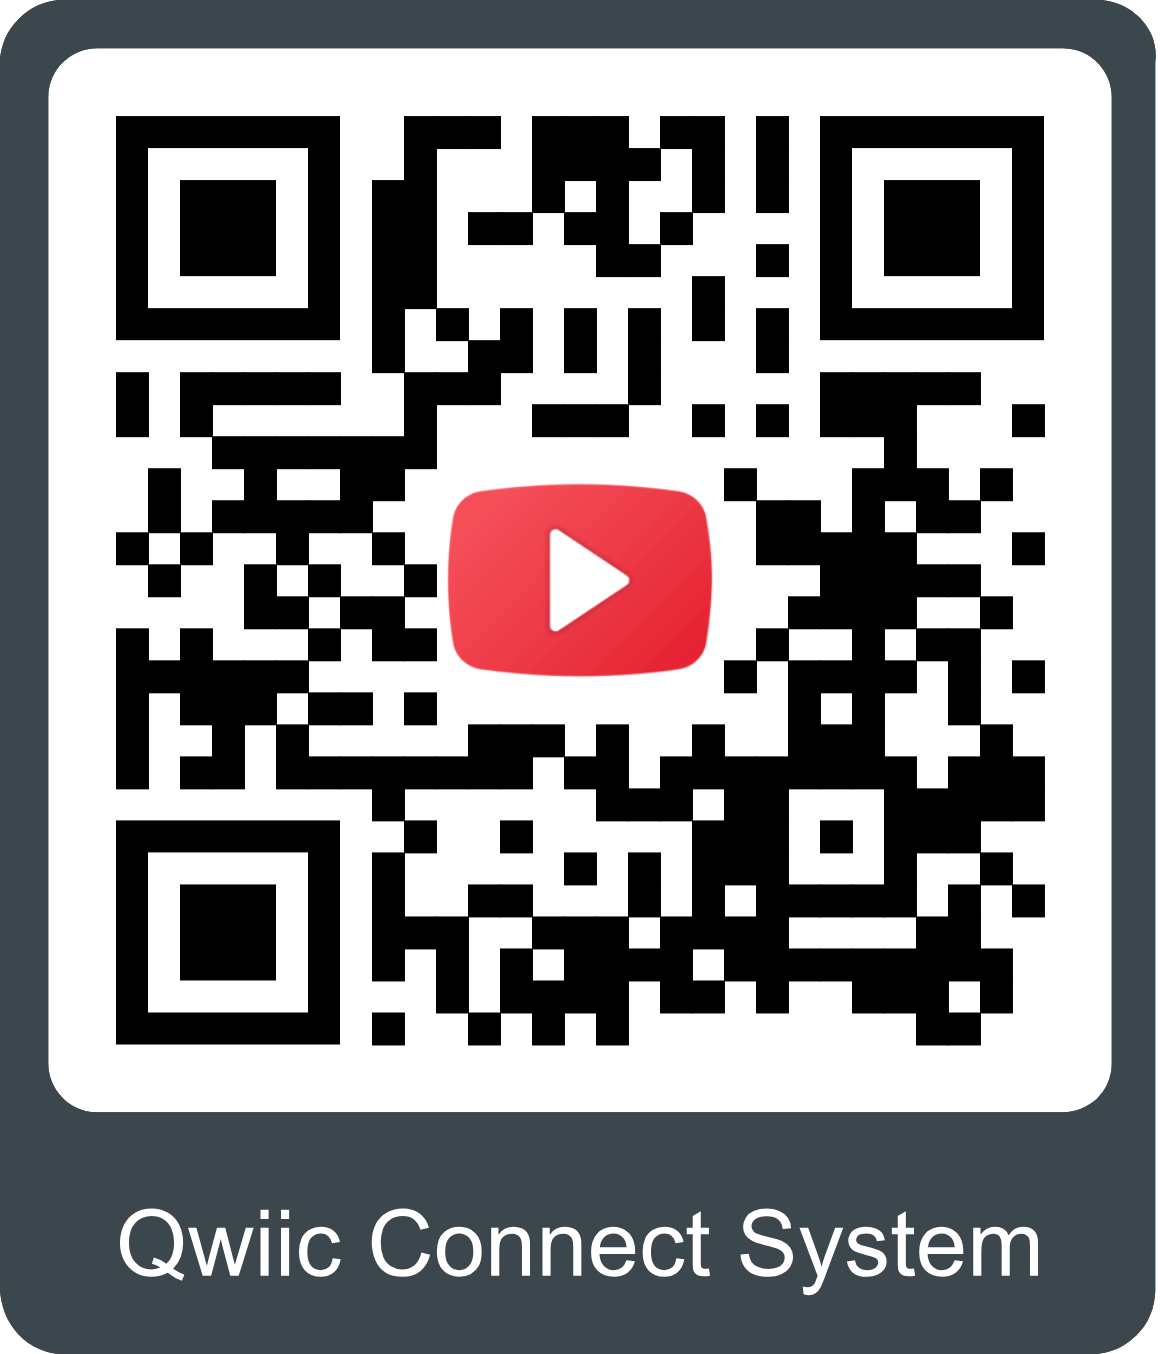 QR code to instructional video